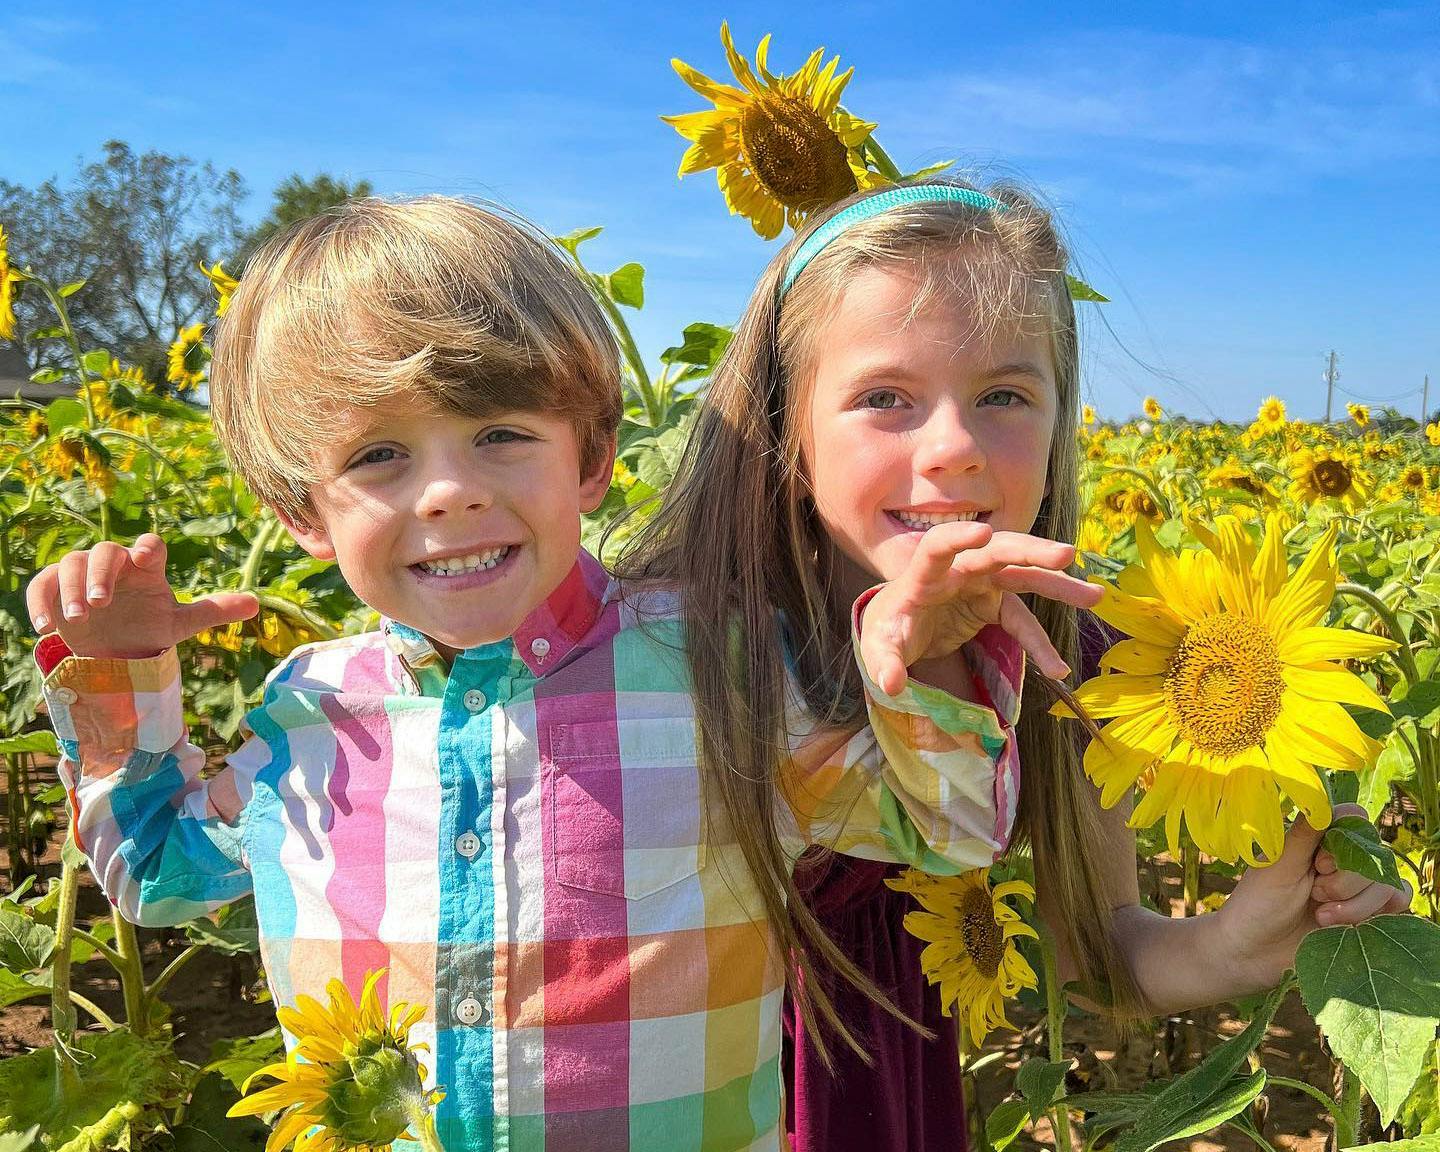 Two children standing next to each other and smiling while standing in a field of sunflowers.